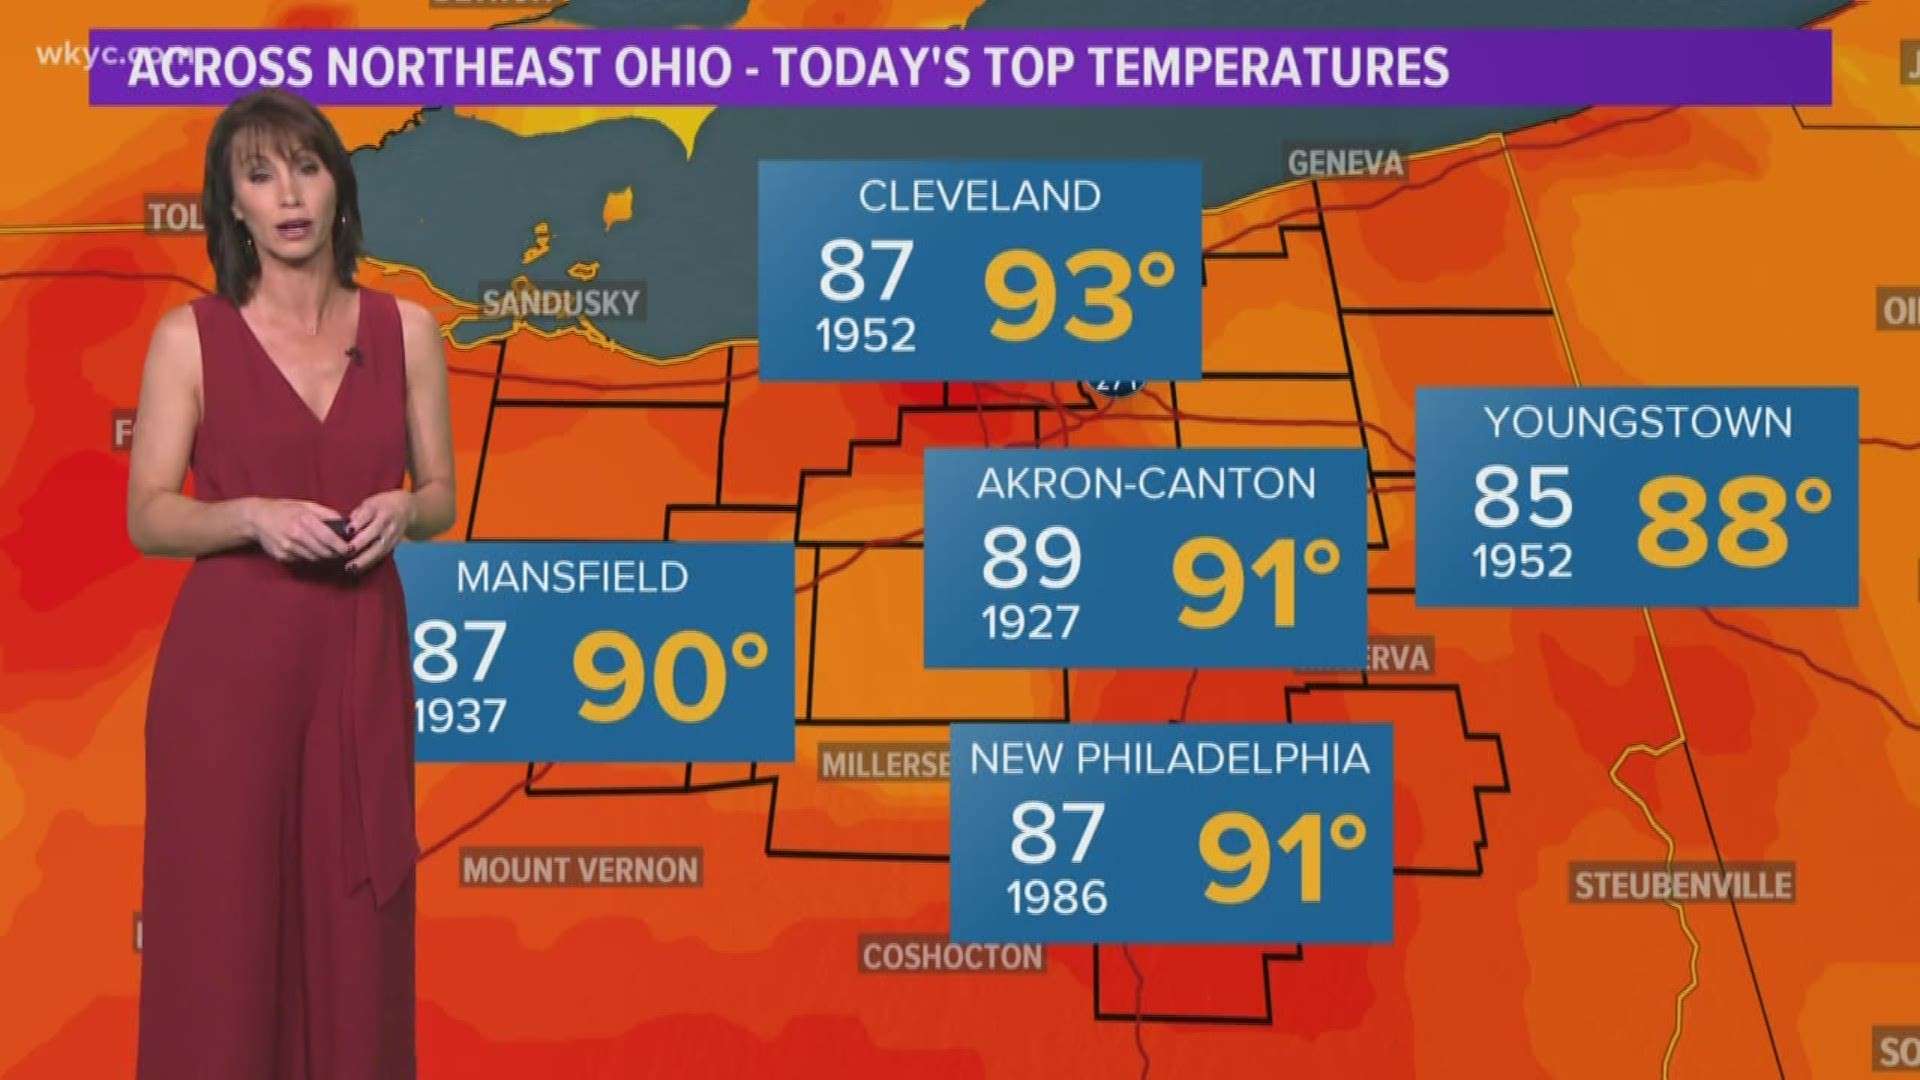 Tuesday's high of 93 broke a record set in 1952. It also marked the 20th day in 2019 when high temperatures hit 90 degrees or better in Cleveland.